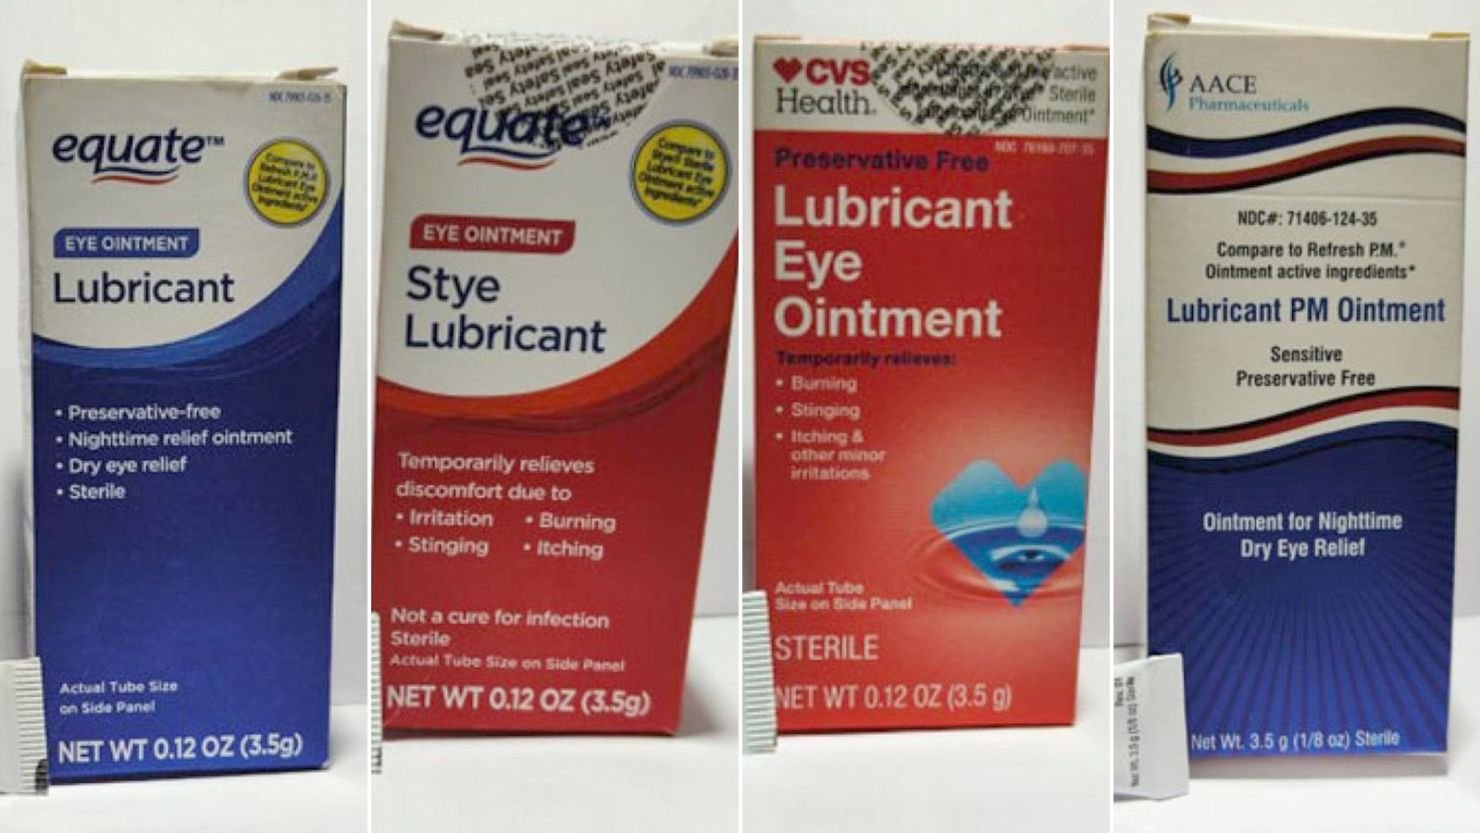 Popular eye ointments may not be sterile, recall warns CNN Business